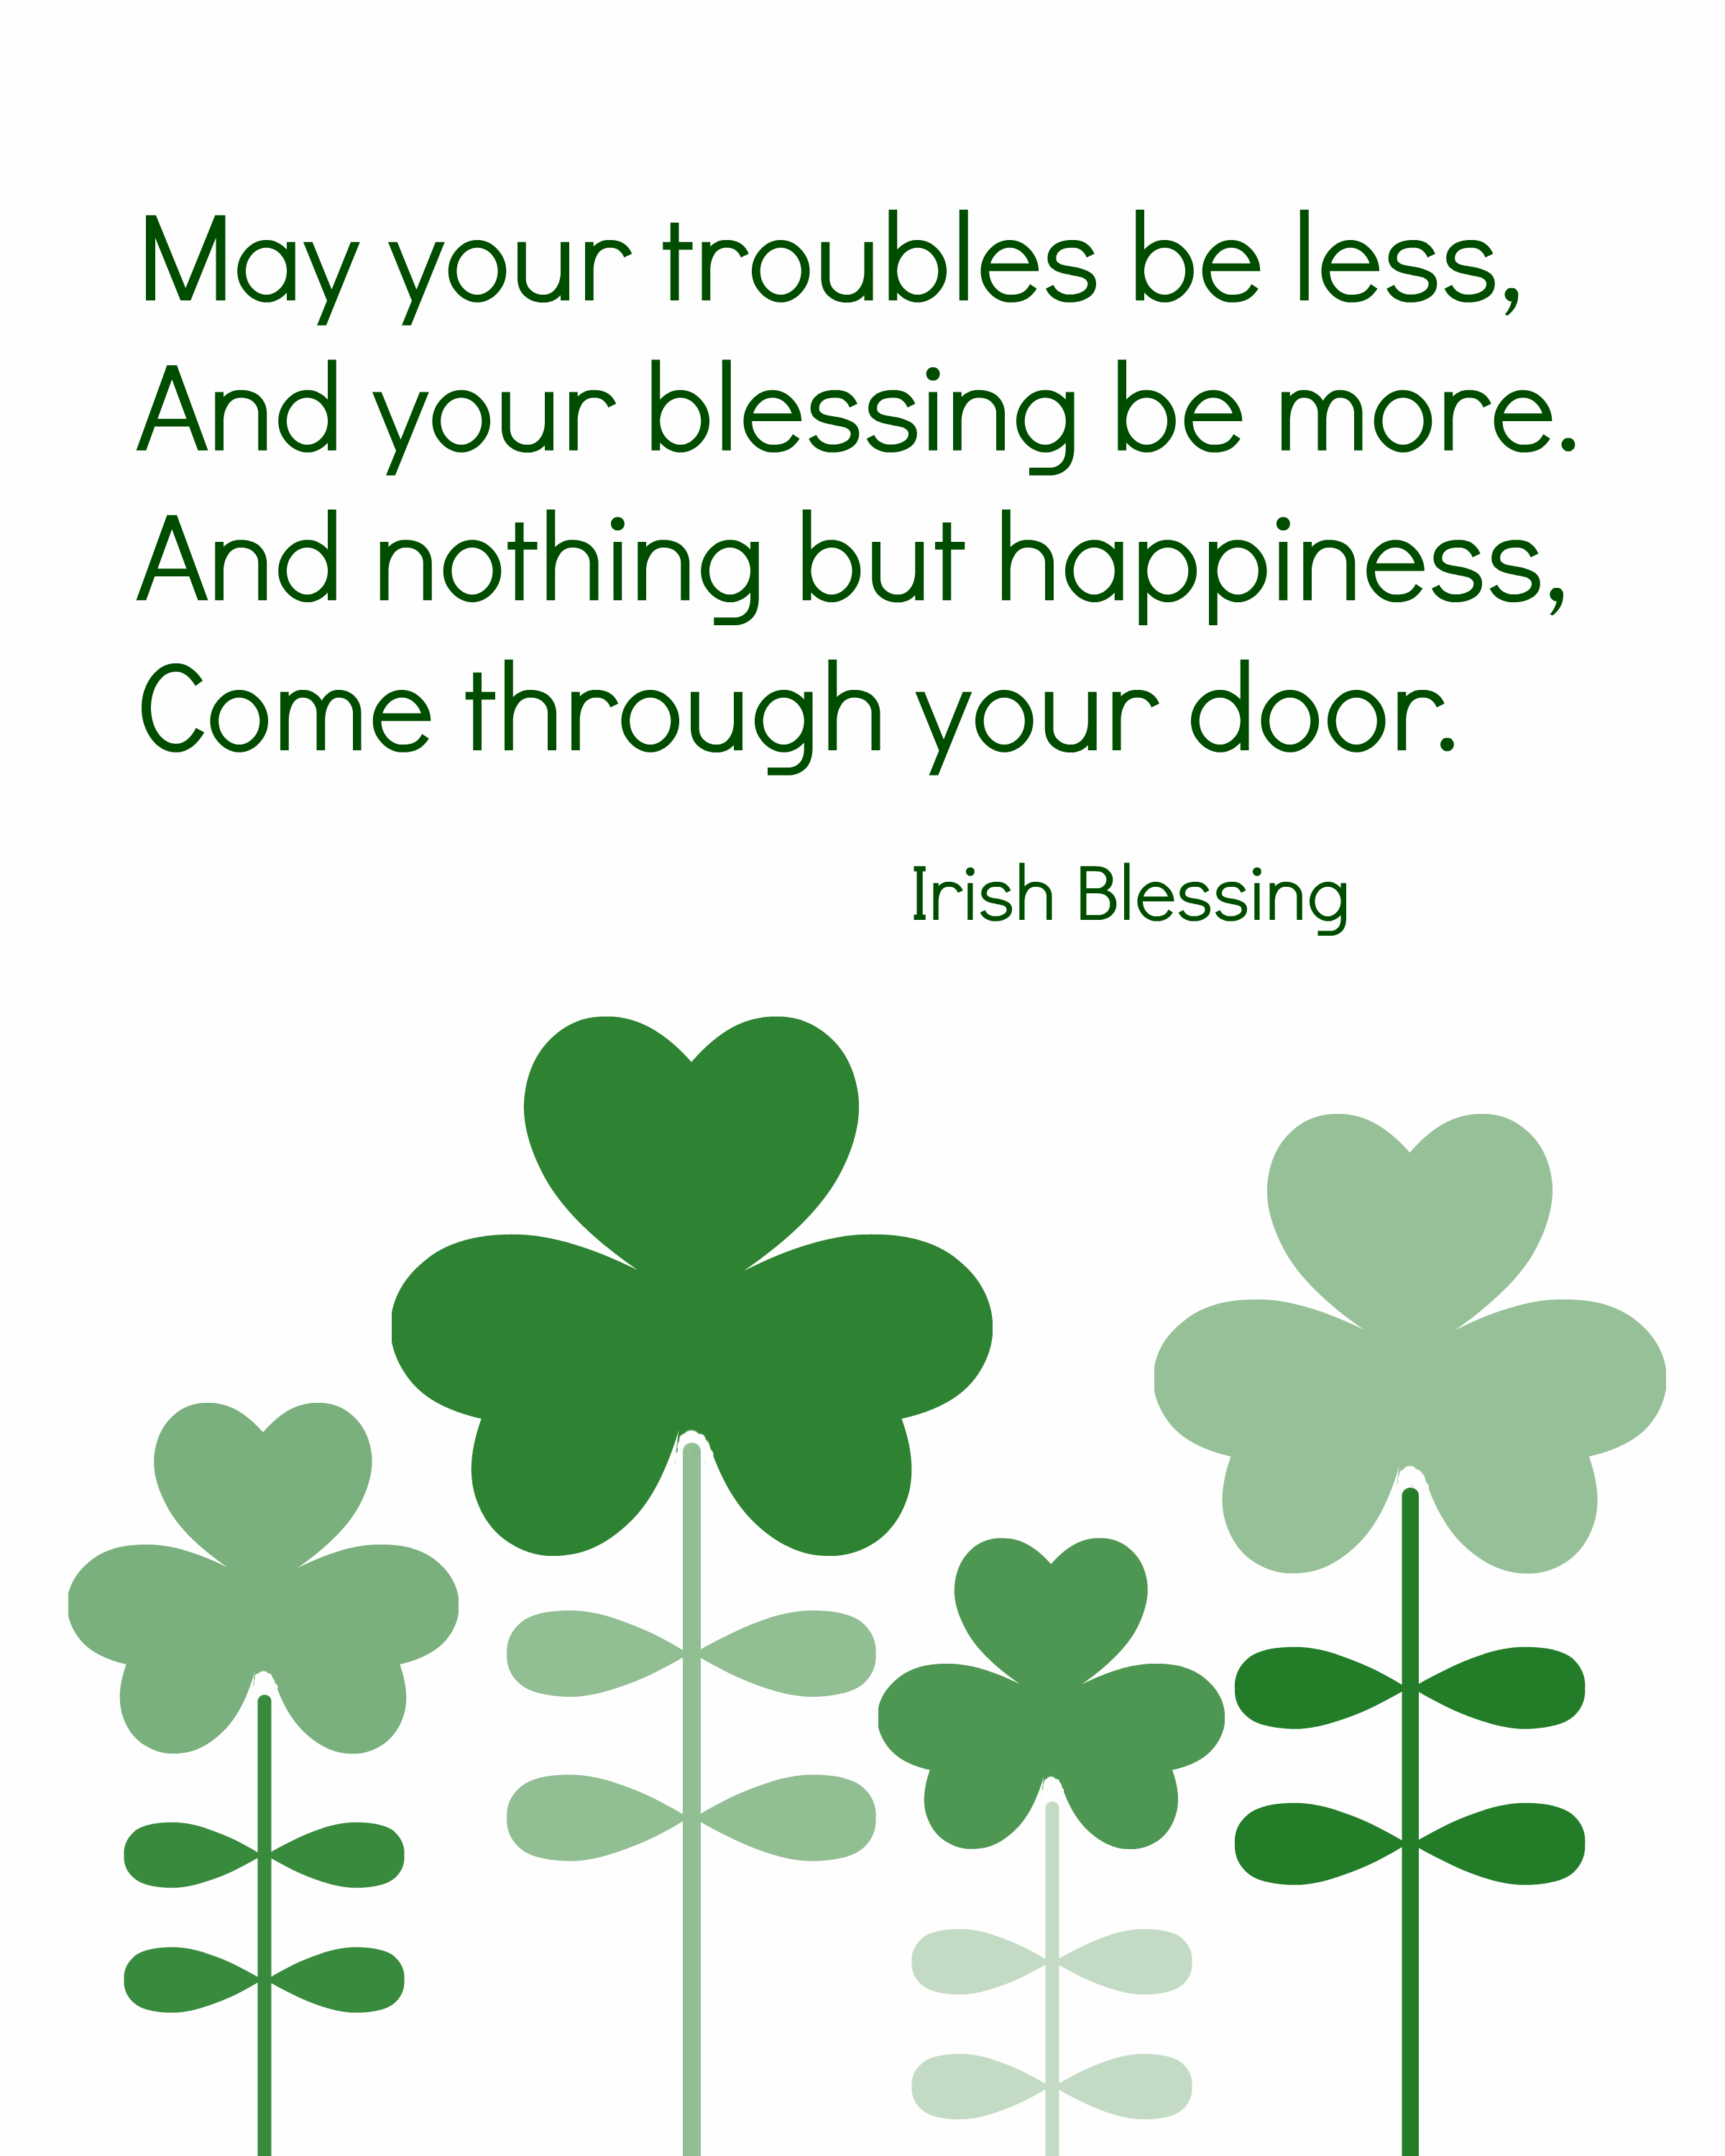 st-patrick-s-day-quote-an-extraordinary-day